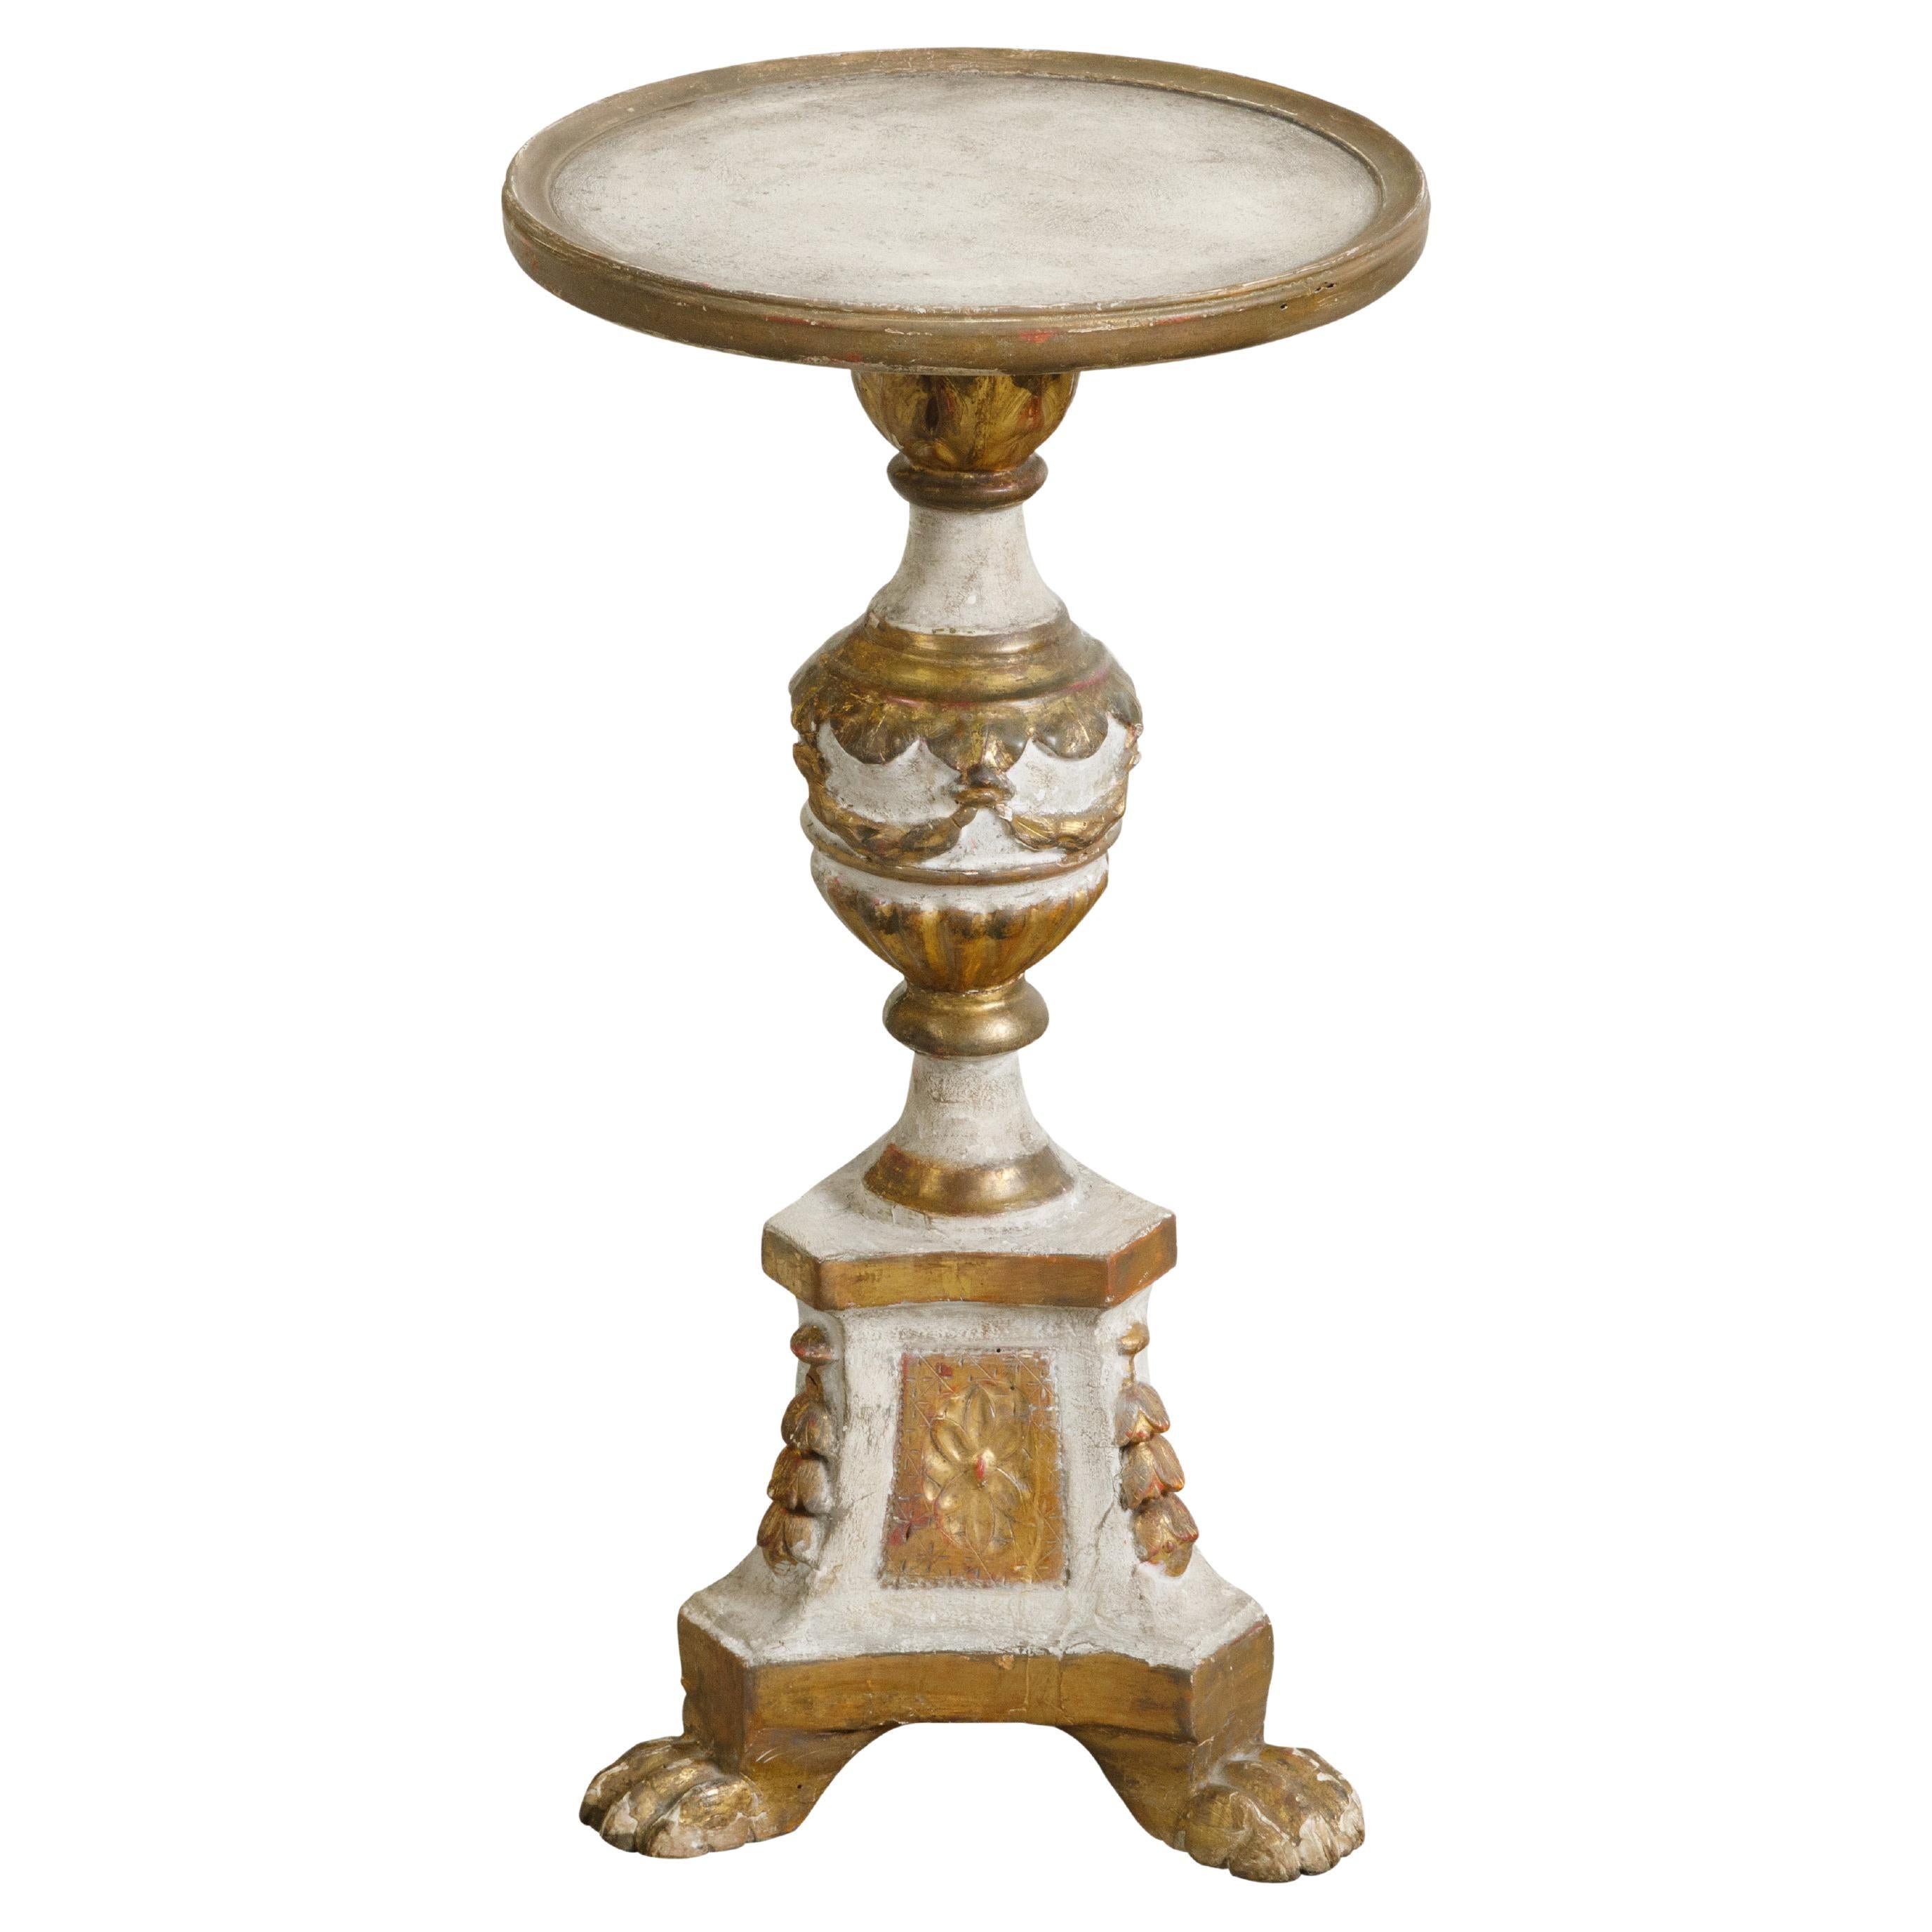 French 1820s Restauration Period Painted and Parcel Gilt Guéridon Table For Sale